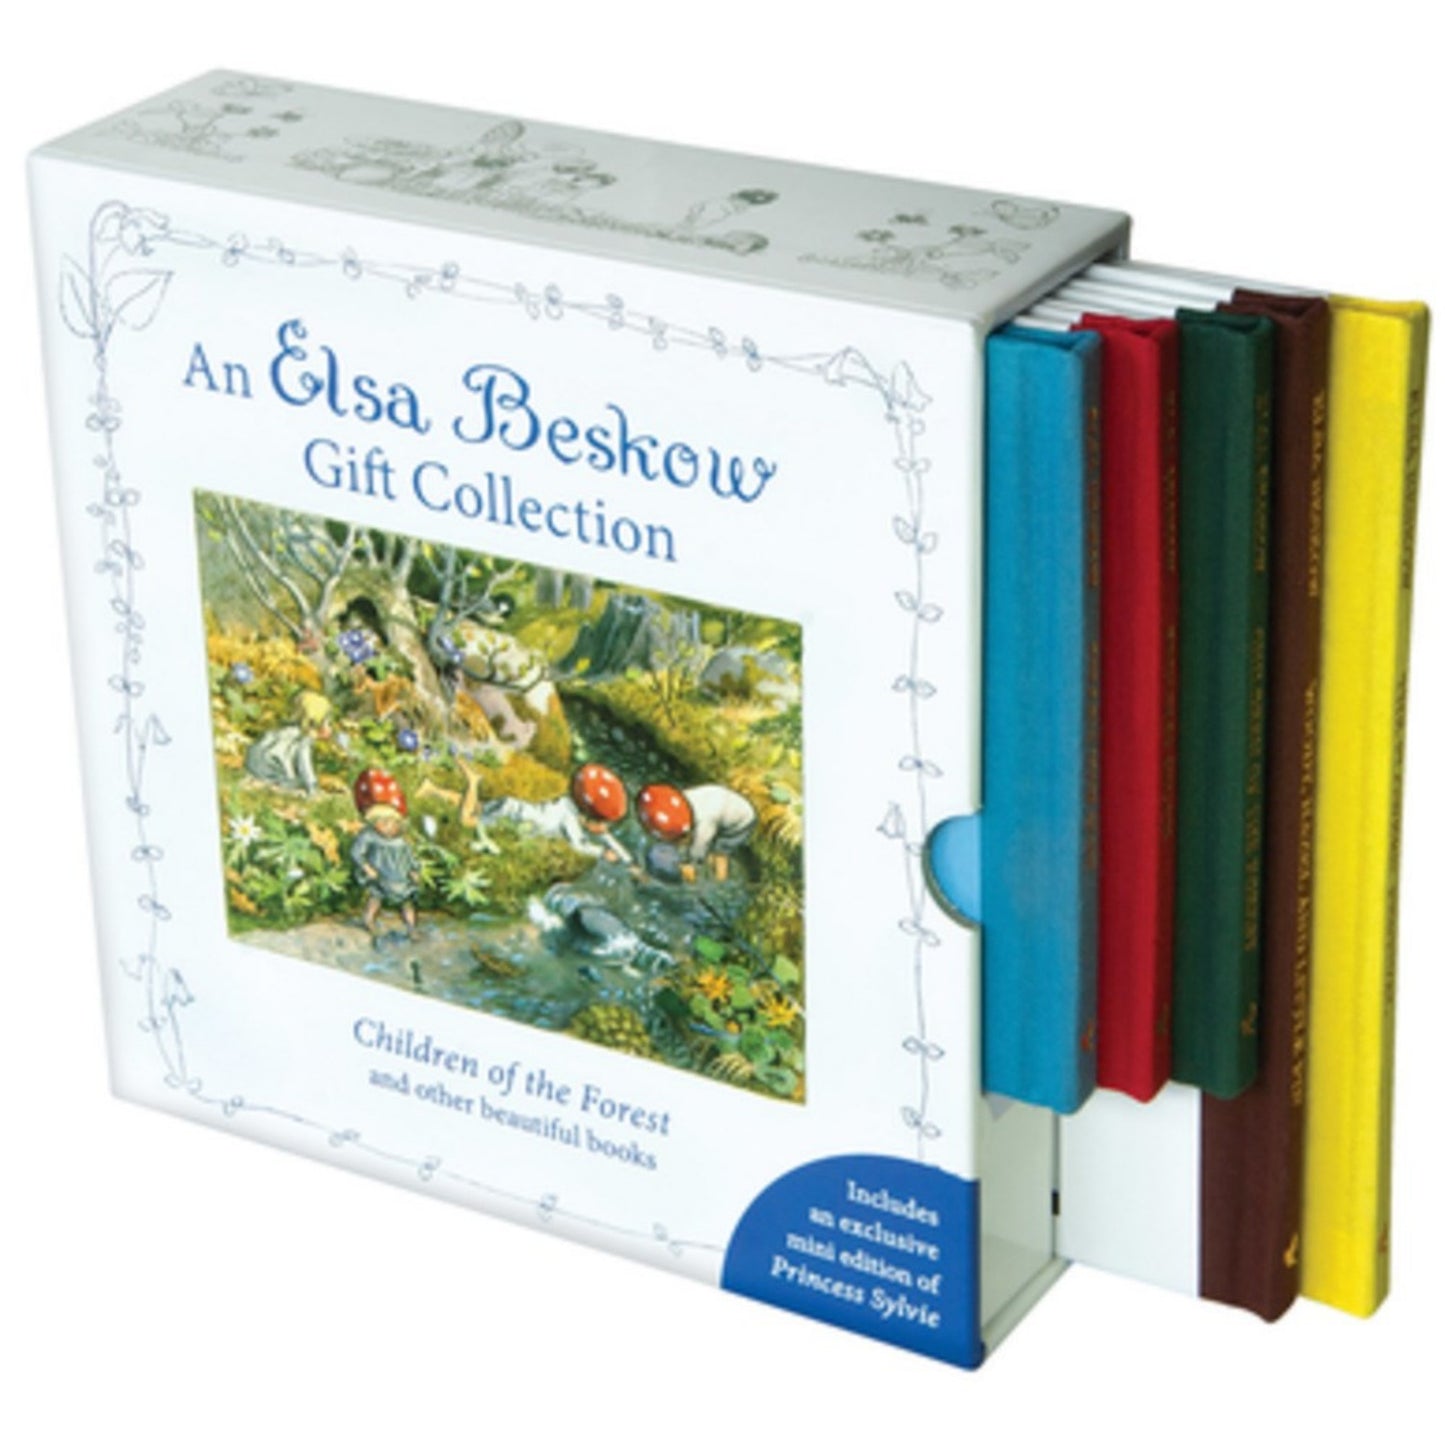 An Elsa Beskow Gift Collection: Children of the Forest and other Beautiful Books